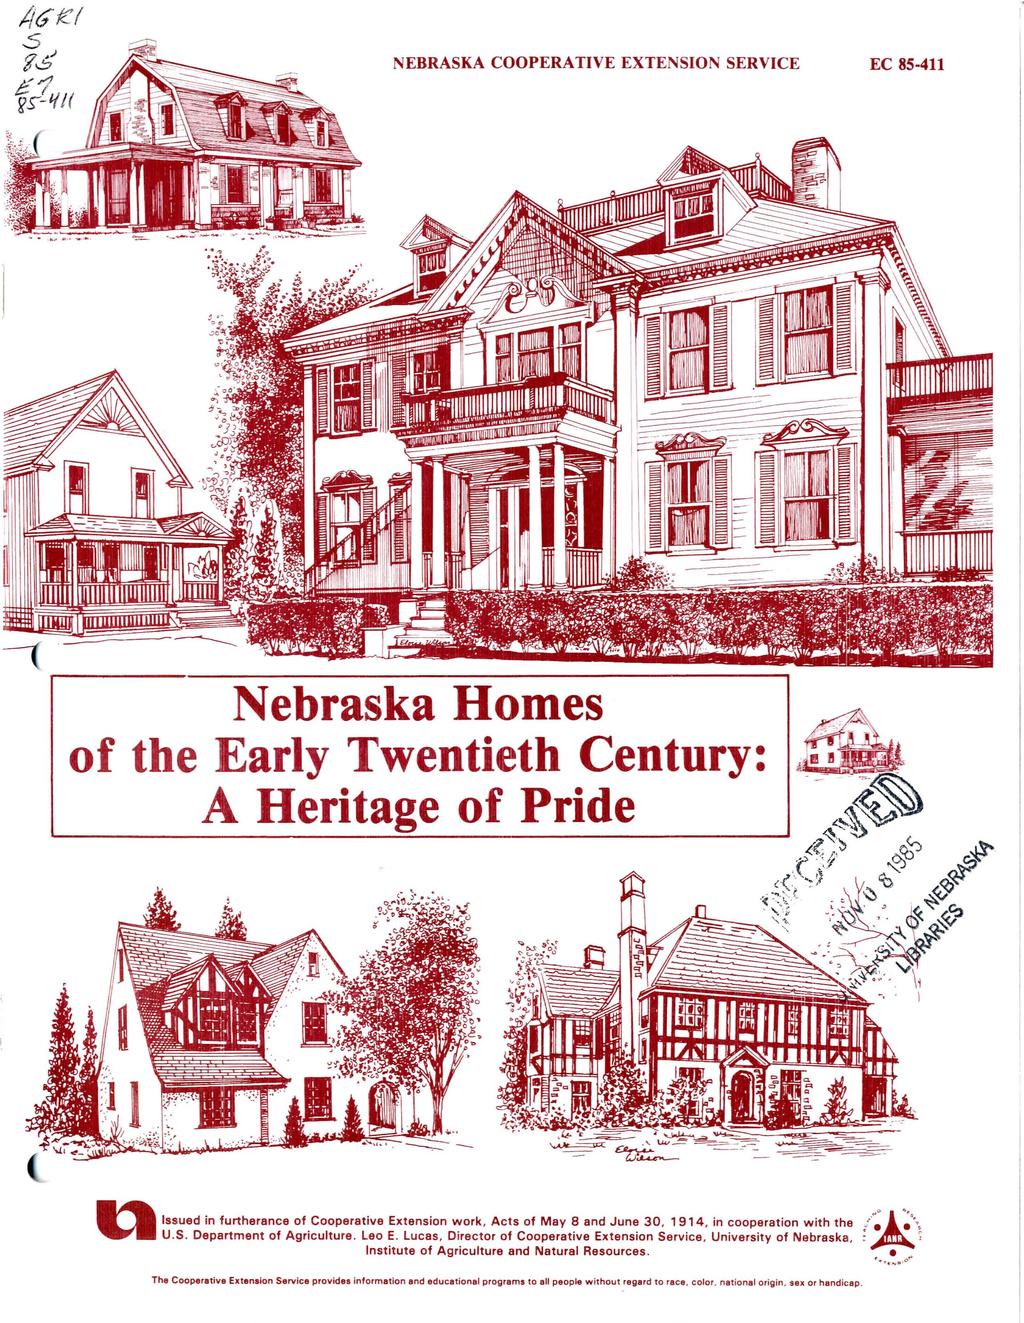 NEBRASKA COOPERATIVE EXTENSION SERVICE EC 85-411 Nebraska Homes of the Early Twentieth Century: A Heritage of Pride ~ Issued in furtherance of Cooperative Extension work, Acts of May 8 and June 30,